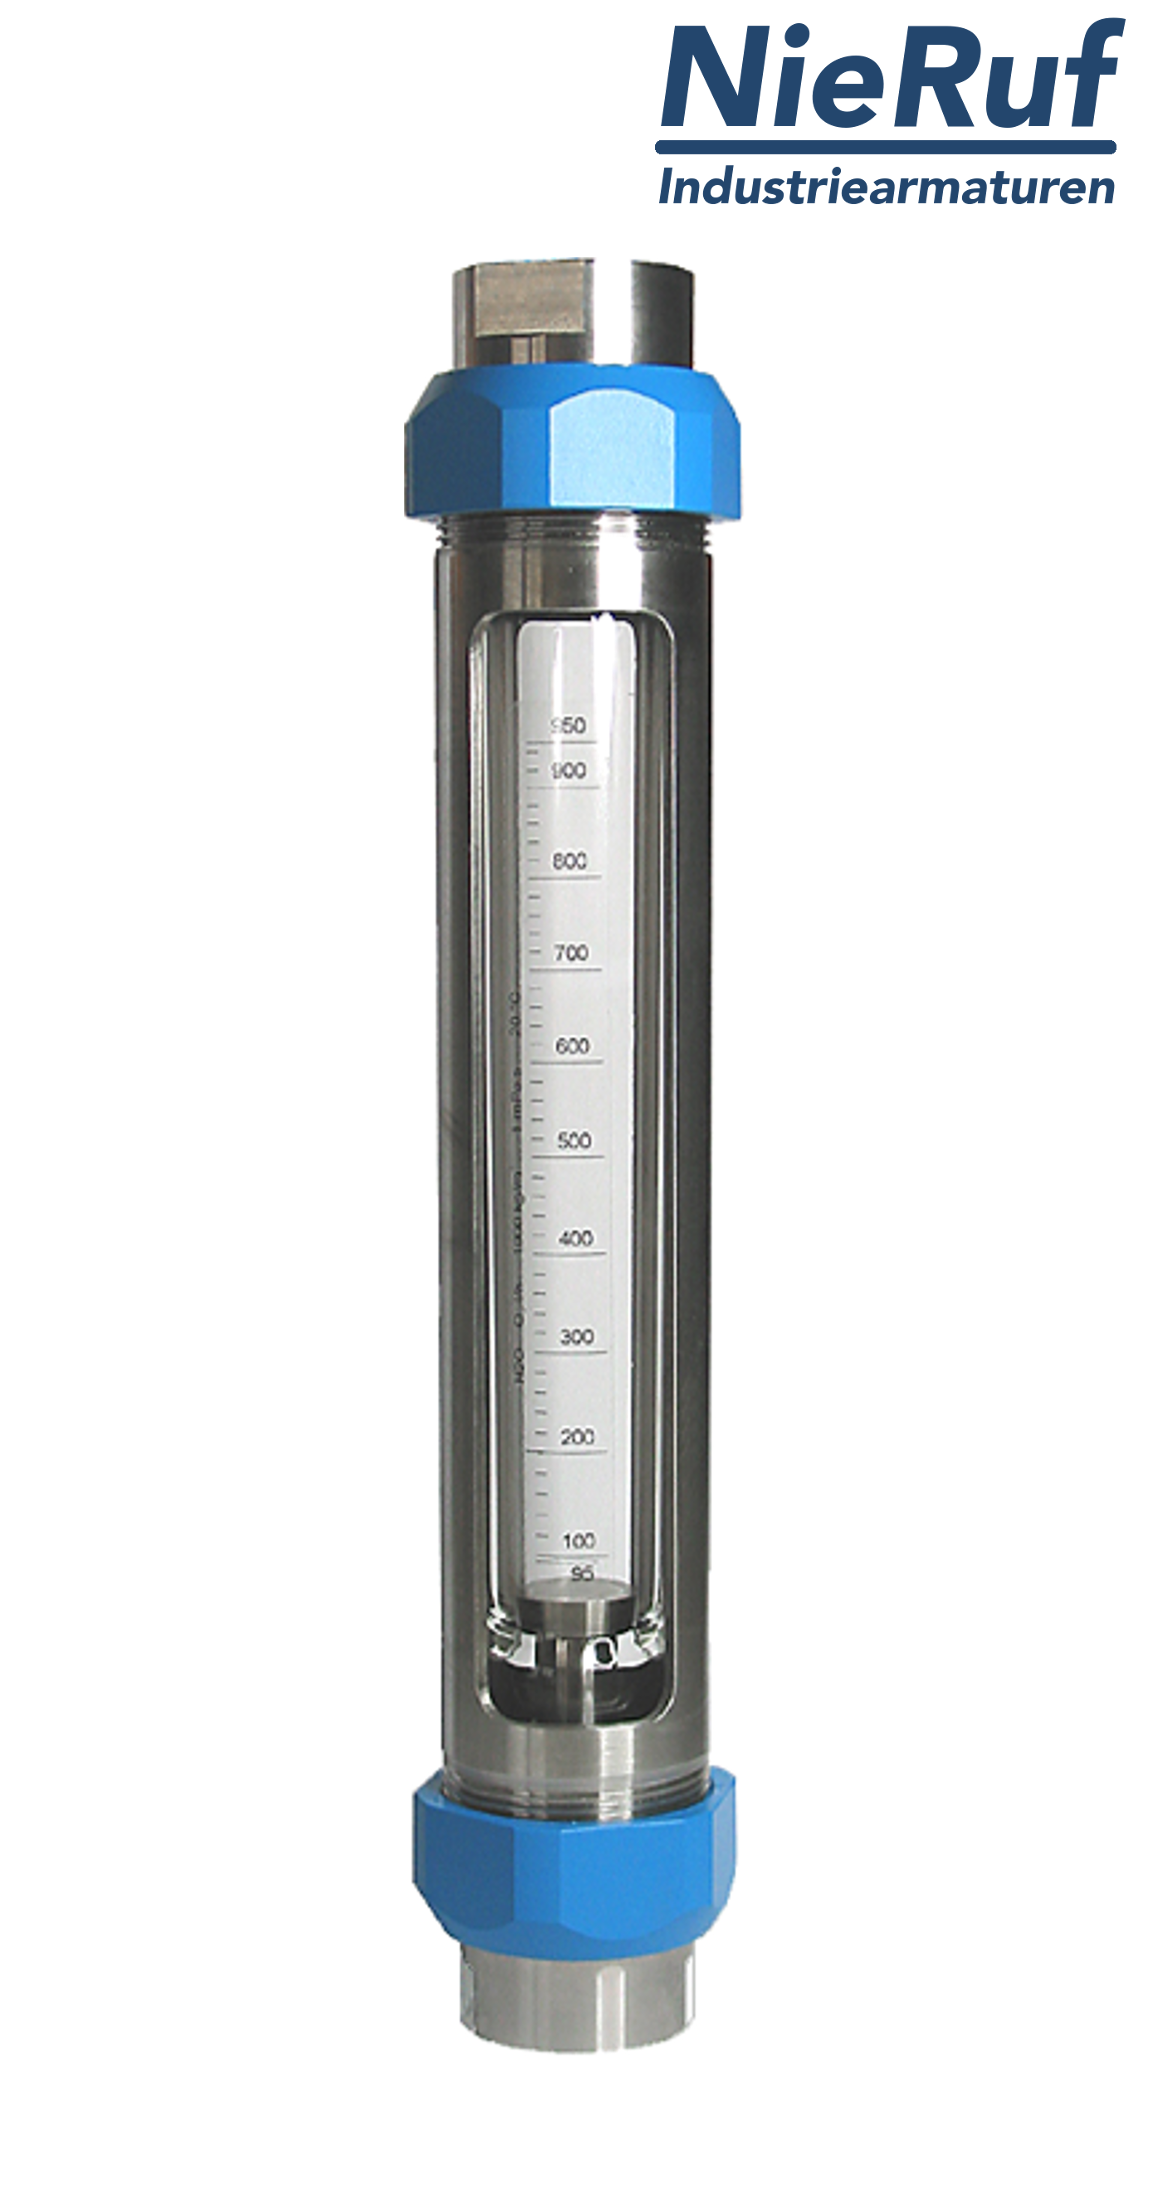 Variable area flowmeter stainless steel + borosilicate 1" inch 500.0 - 5000 l/h water FKM